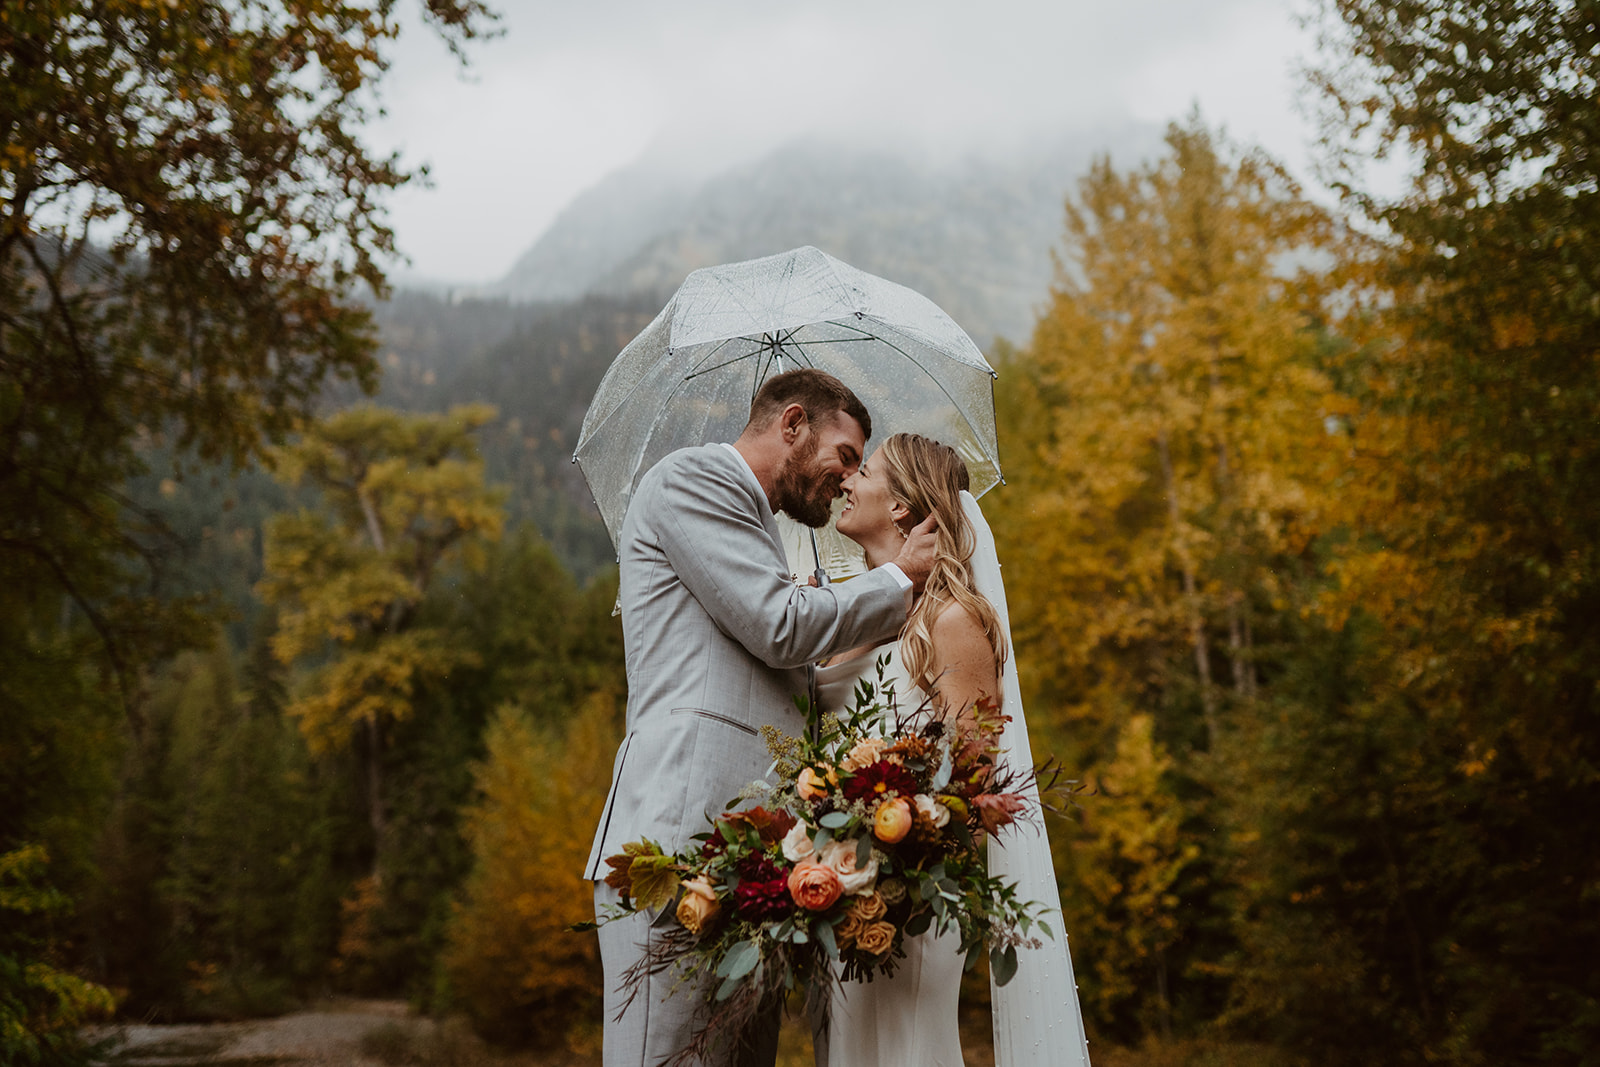 Weston and Kelsey during their fall elopement in Montana surrounded by oranged-leaves on trees and a mountain in the background.